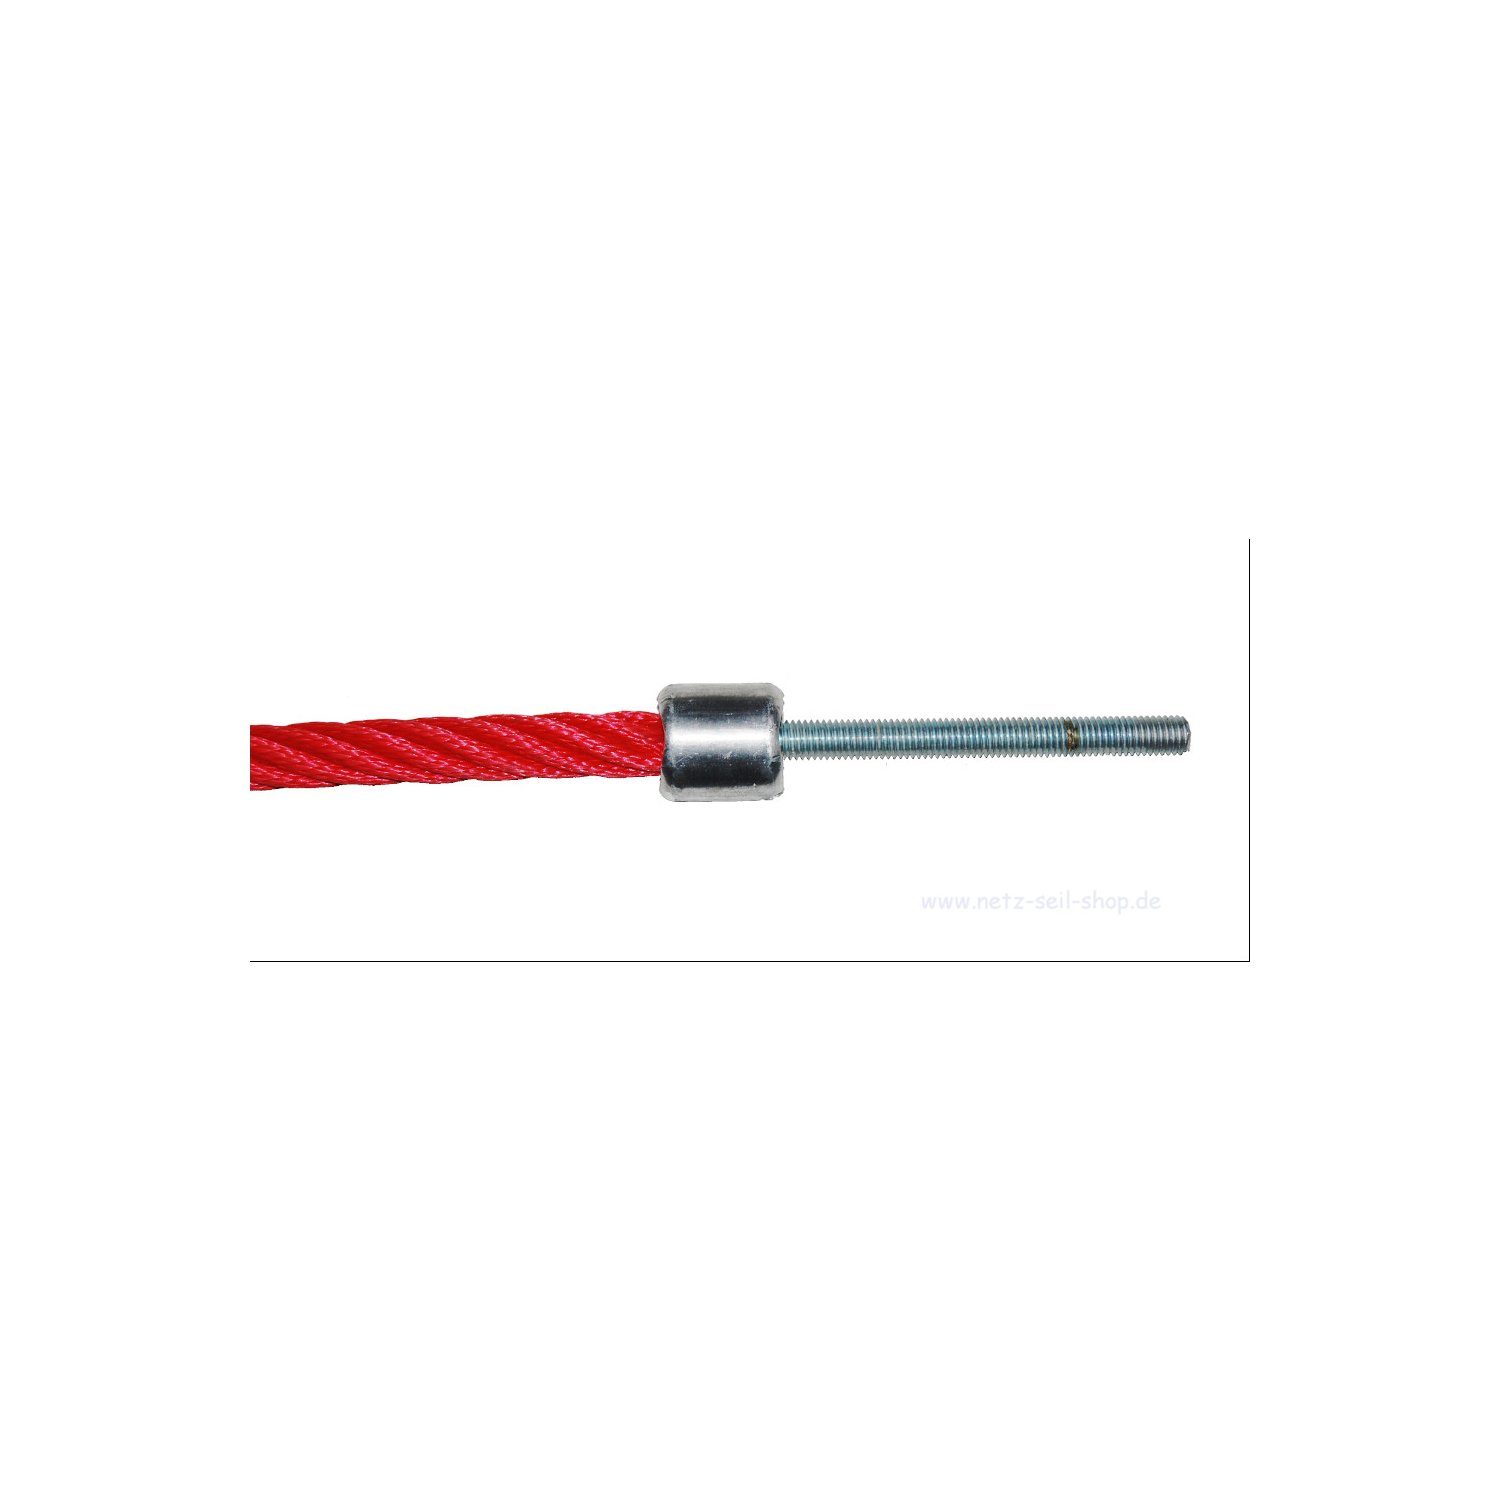 Threaded bolt M12 x 140mm, galvanised, directly pressed [11,30 EUR]